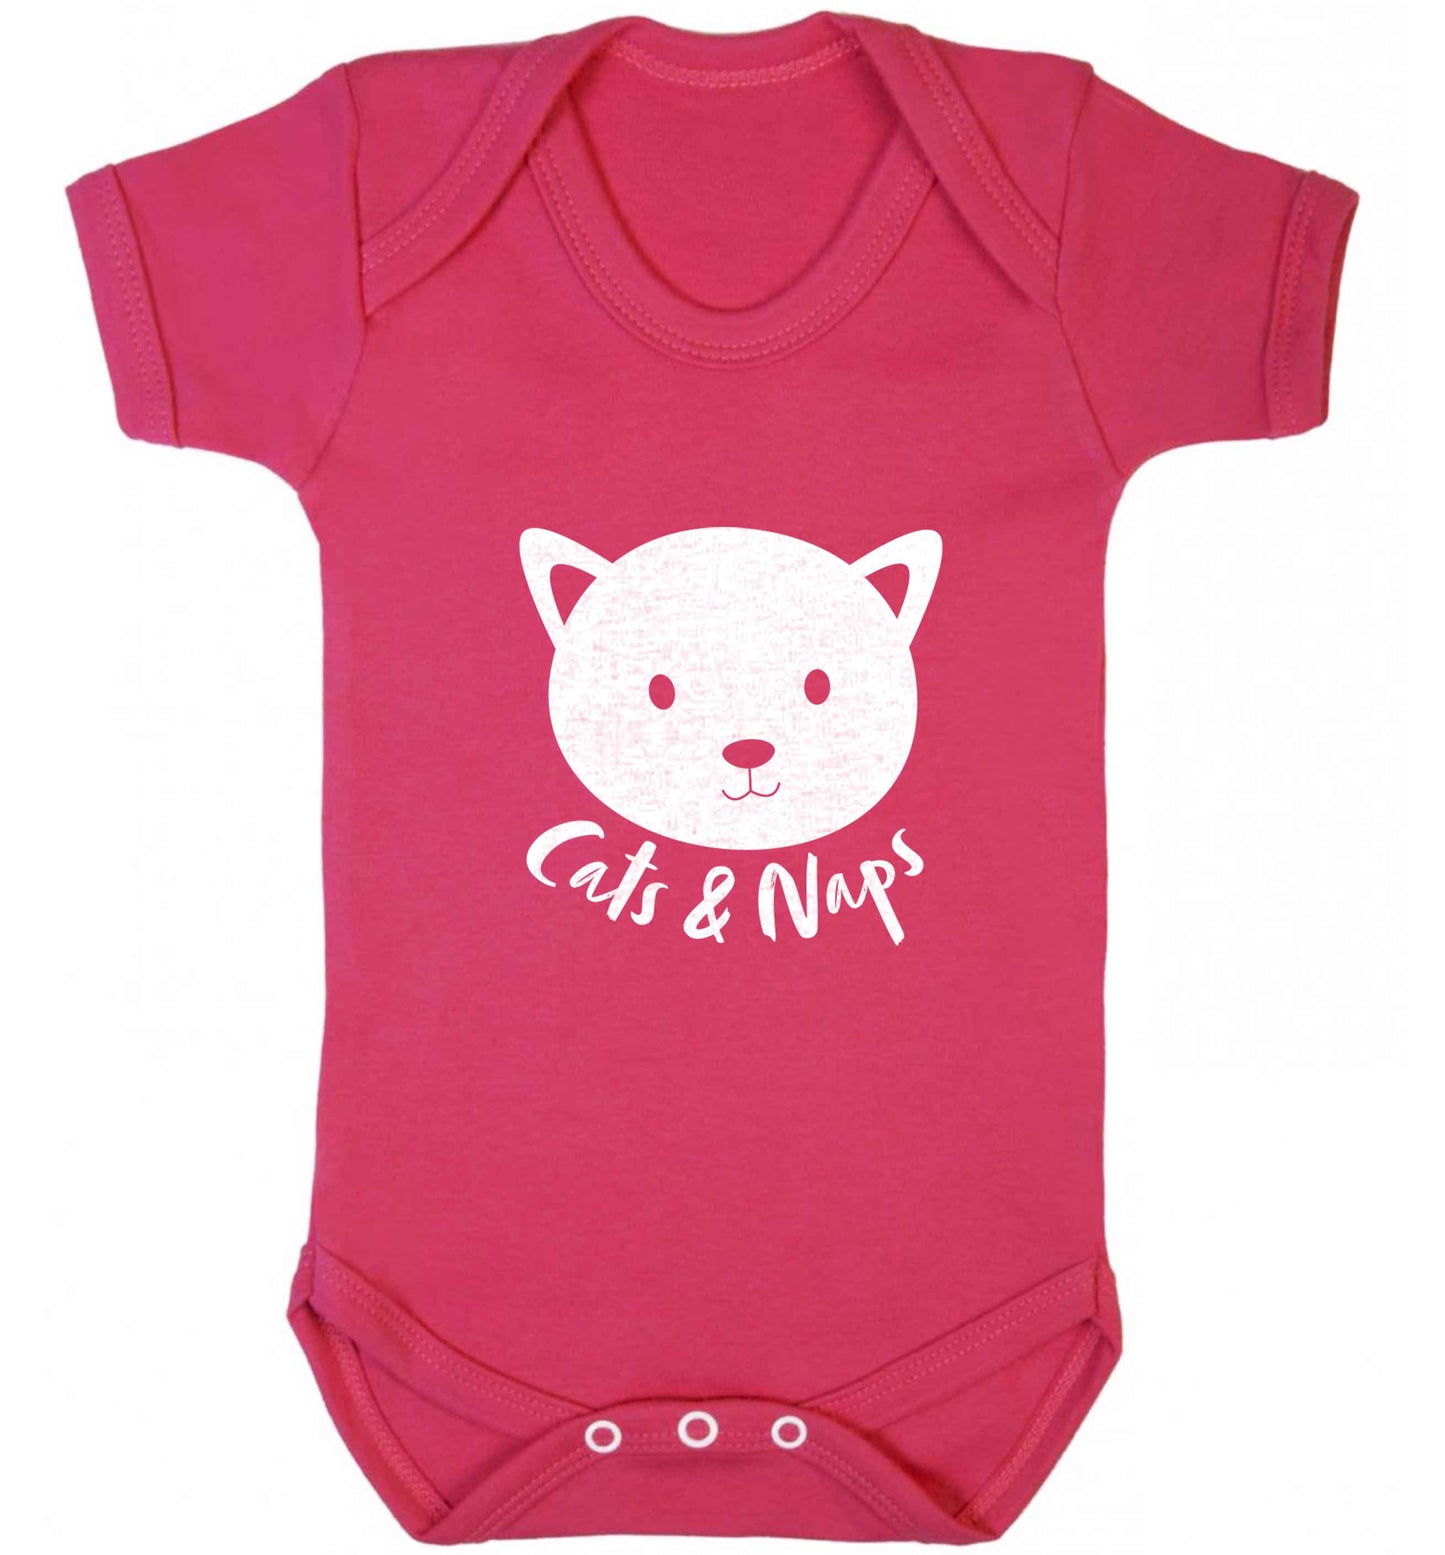 Cats and naps Kit baby vest dark pink 18-24 months